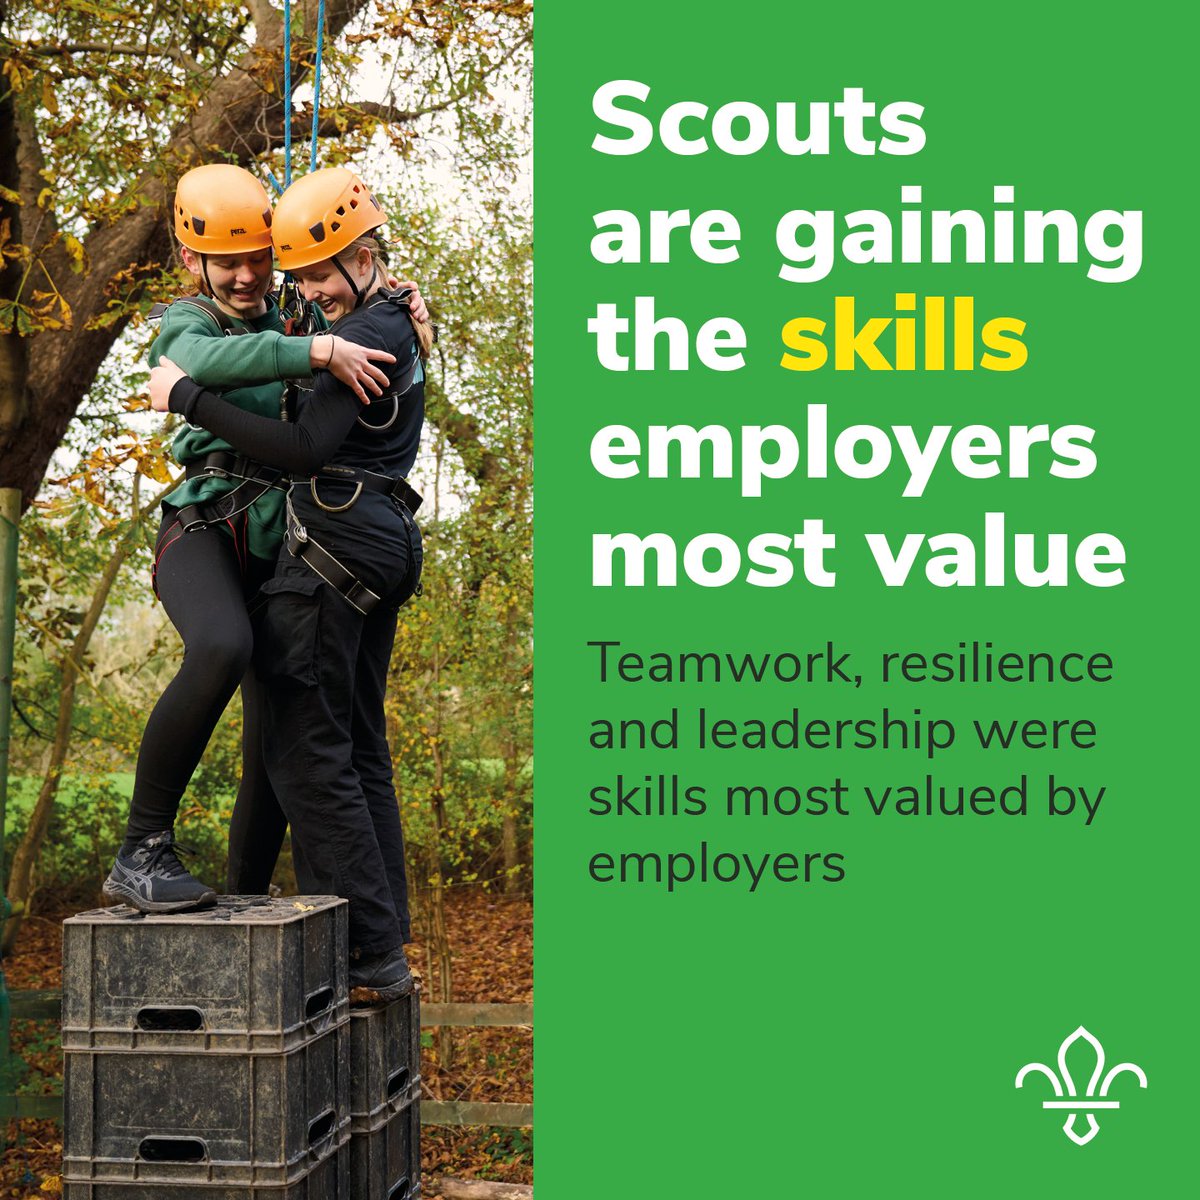 RT scouts 'Young people who do extra-curricular activities gain the skills employers value most and are more optimistic about their careers. New research from @Demos shows how skills learned in Scouts are crucial for employability. Full report here: … '